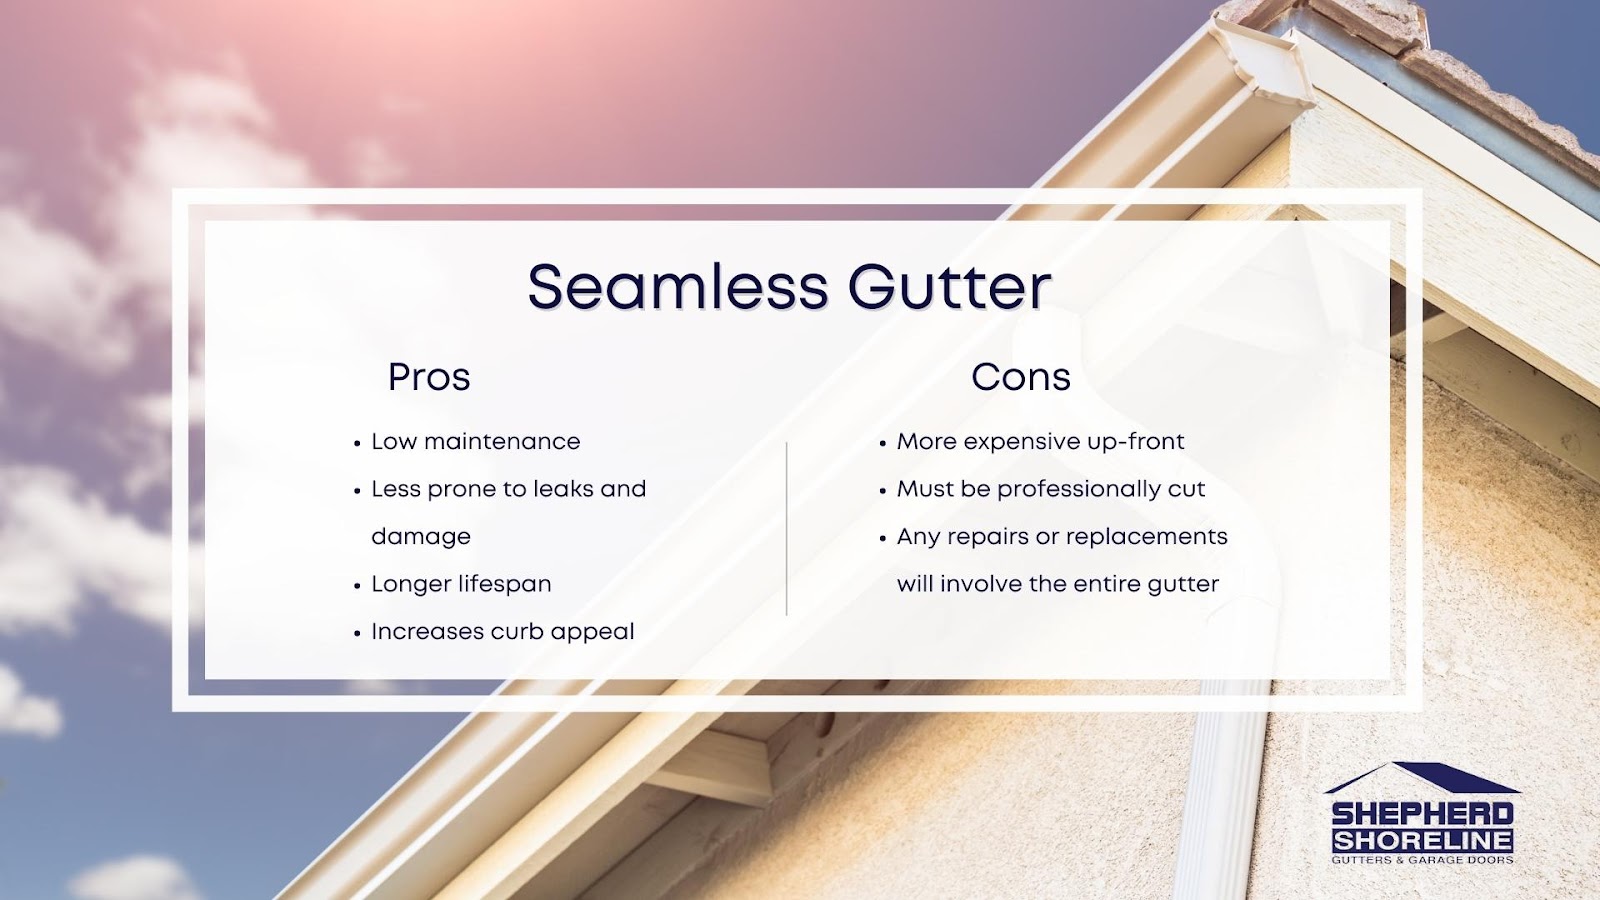 Infographic of the pros and cons of a seamless gutter